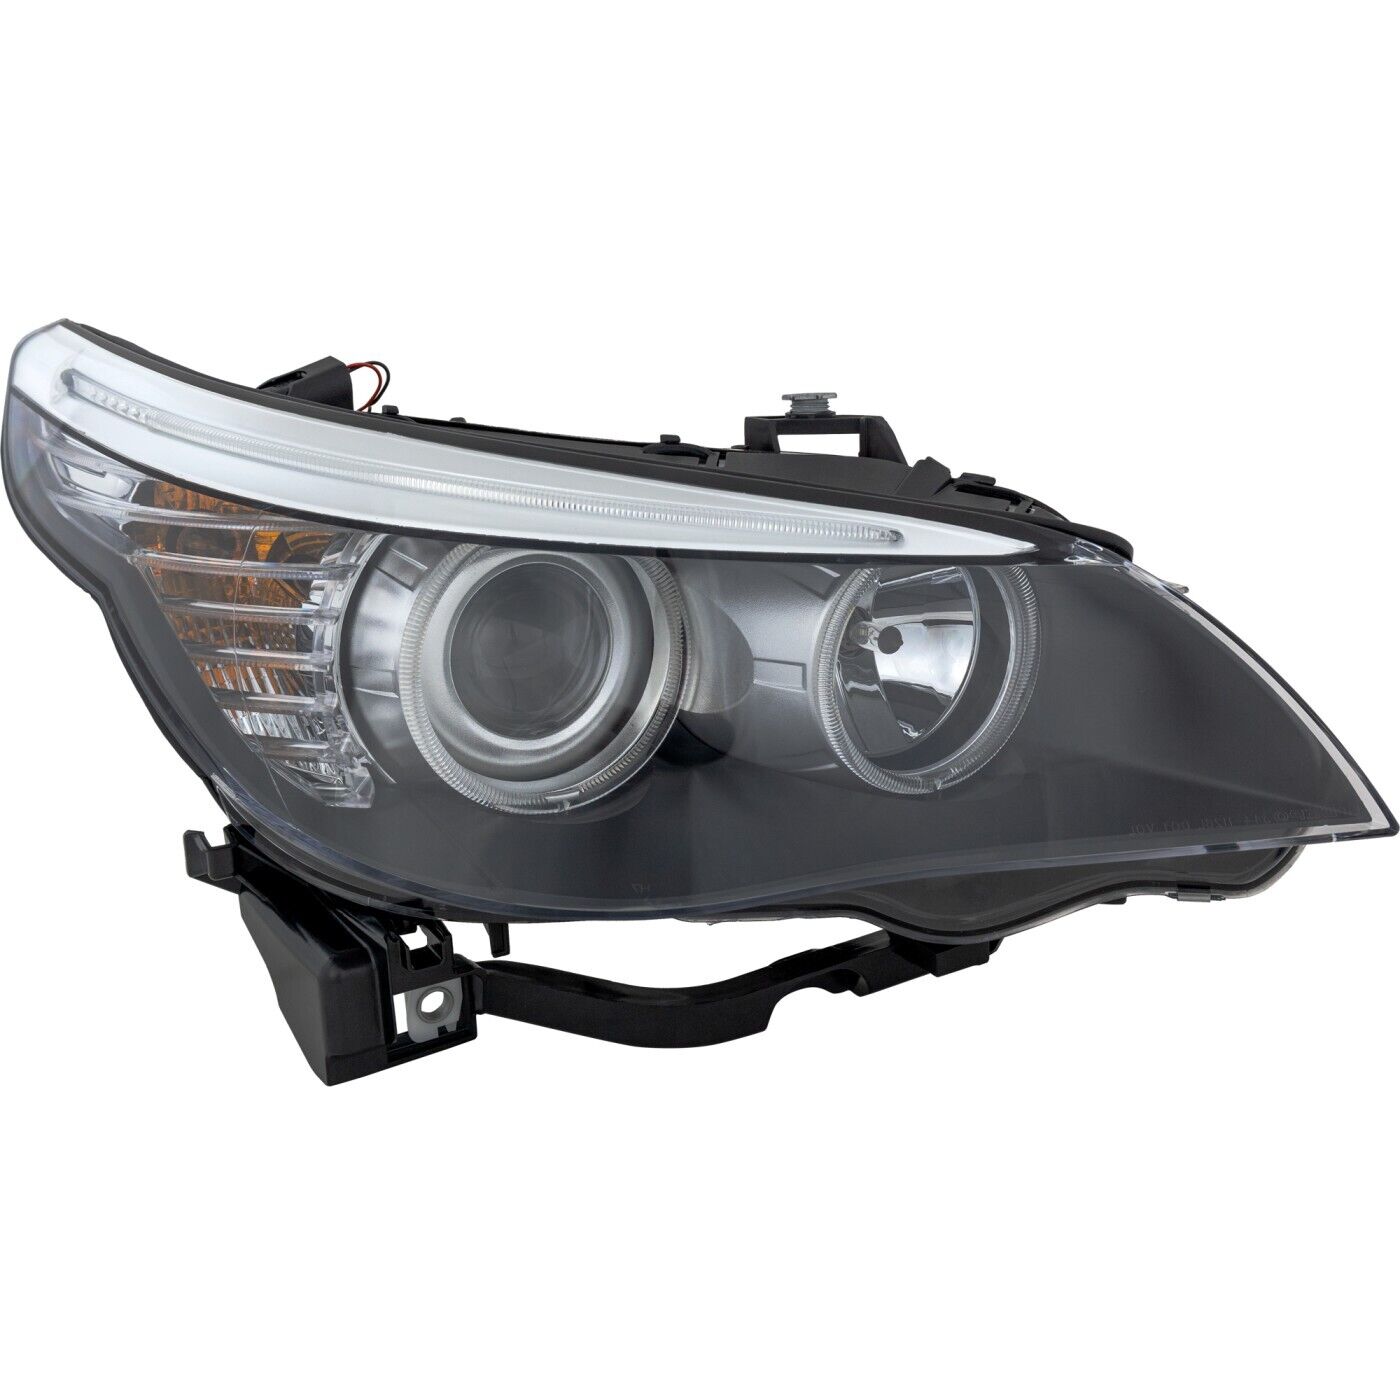 Headlight For 2008 528xi 2008-2010 BMW 528i 2009-10 528i xDrive Right With Bulb